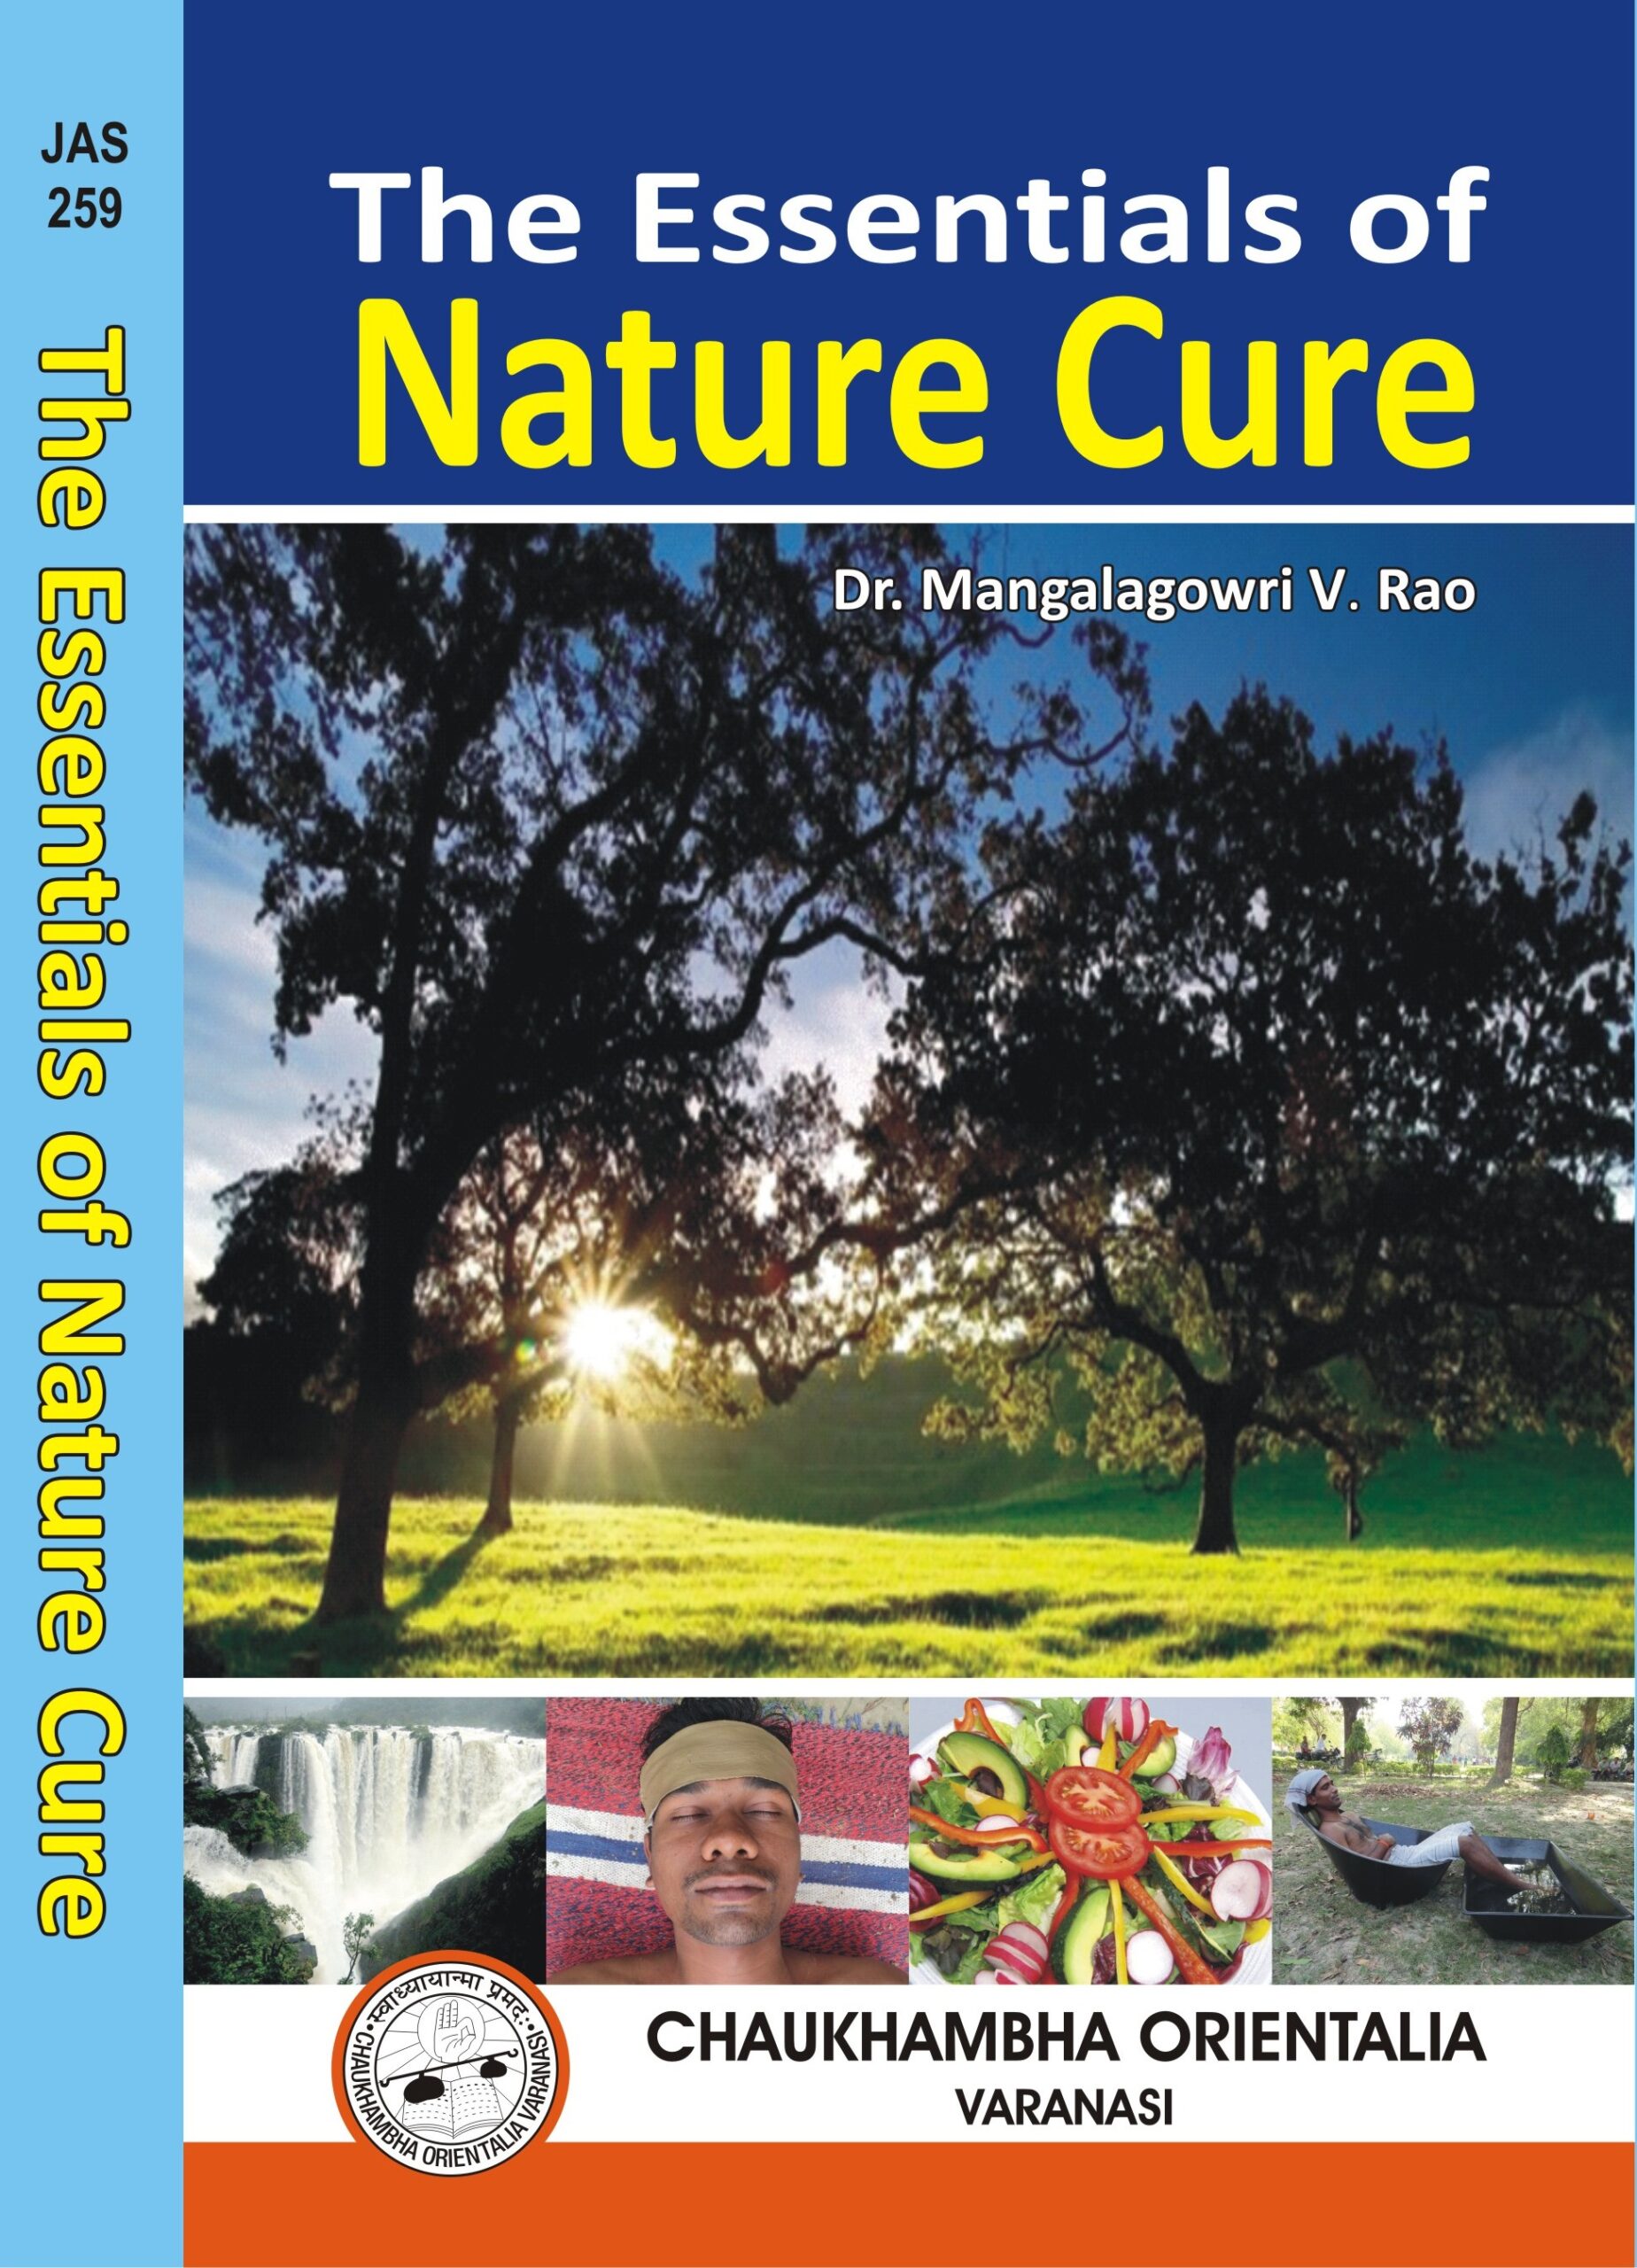 The Essentials of Nature Cure - Chaukhambha